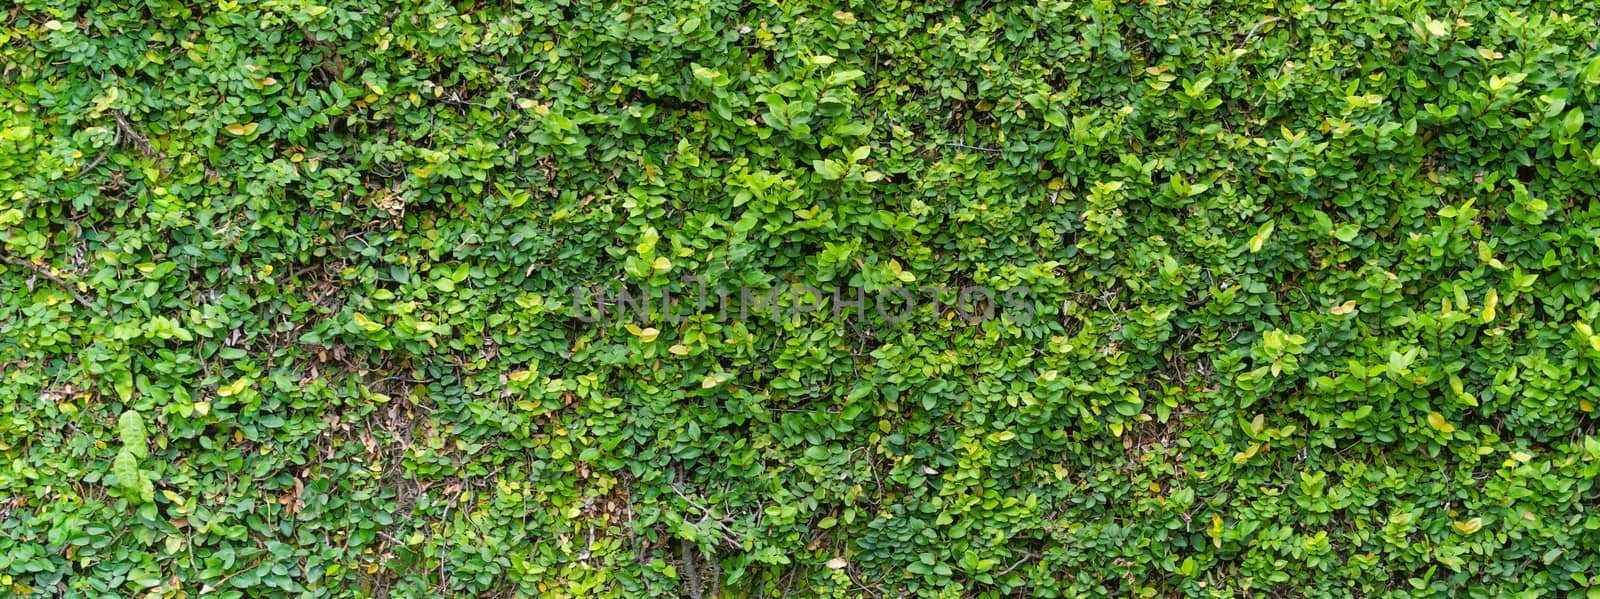 Green Bush Seamless Tileable Texture by nopparats